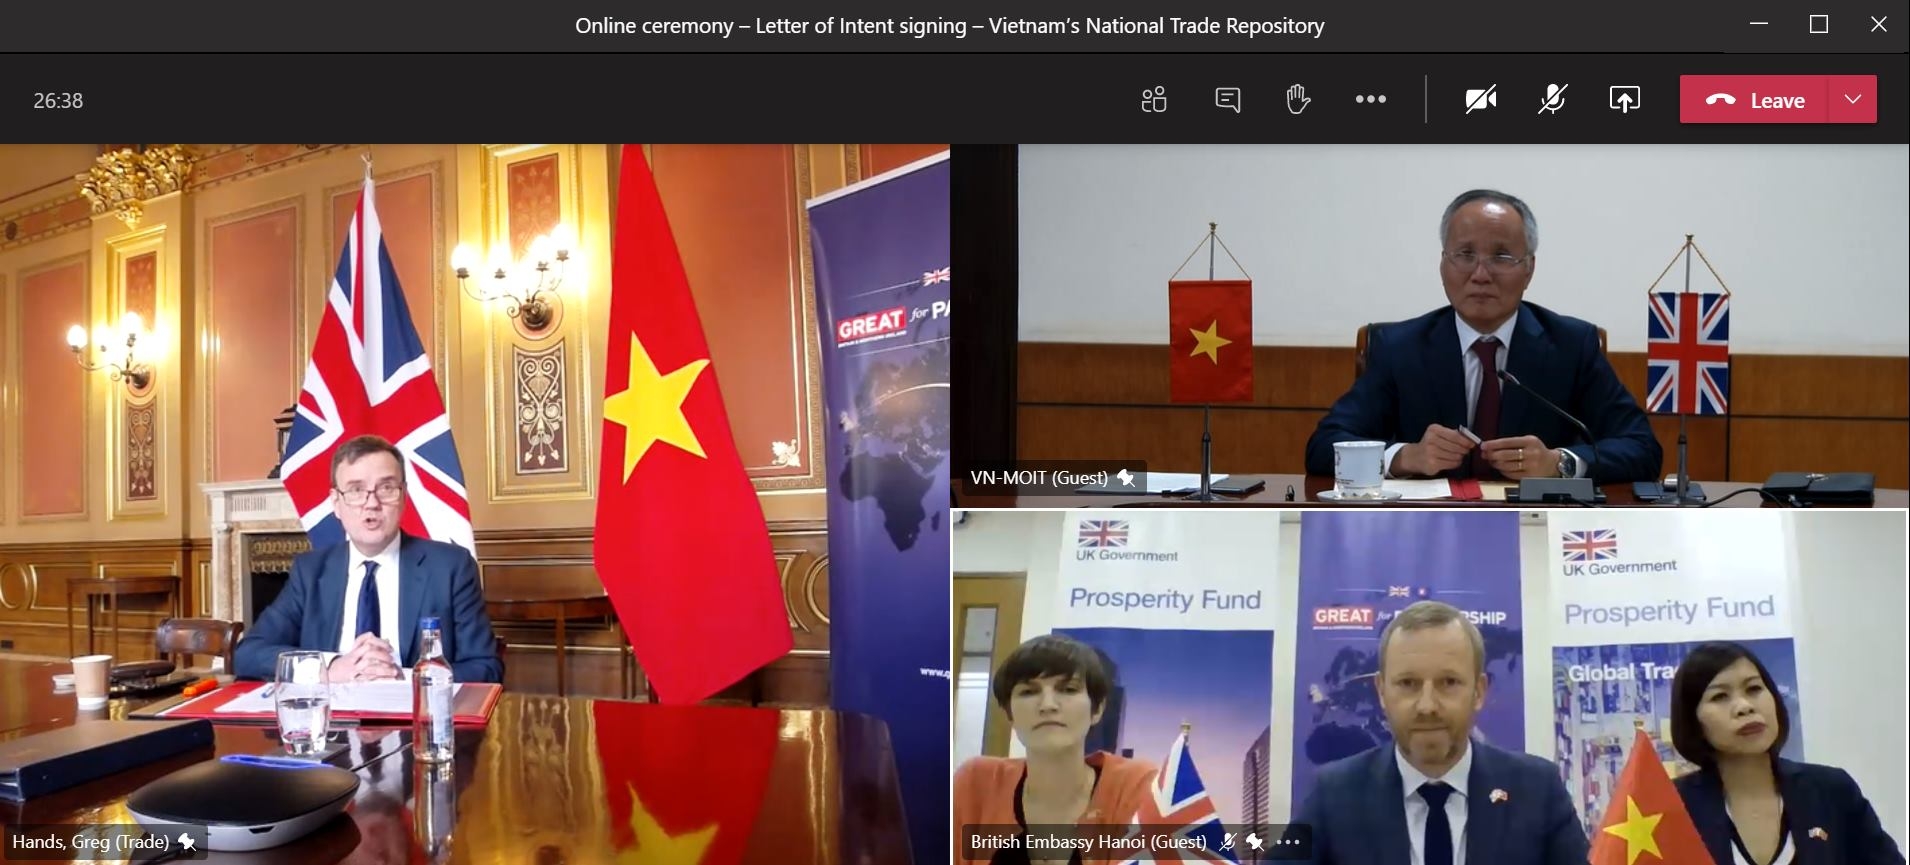 UK supports vietnam developing national trade repository